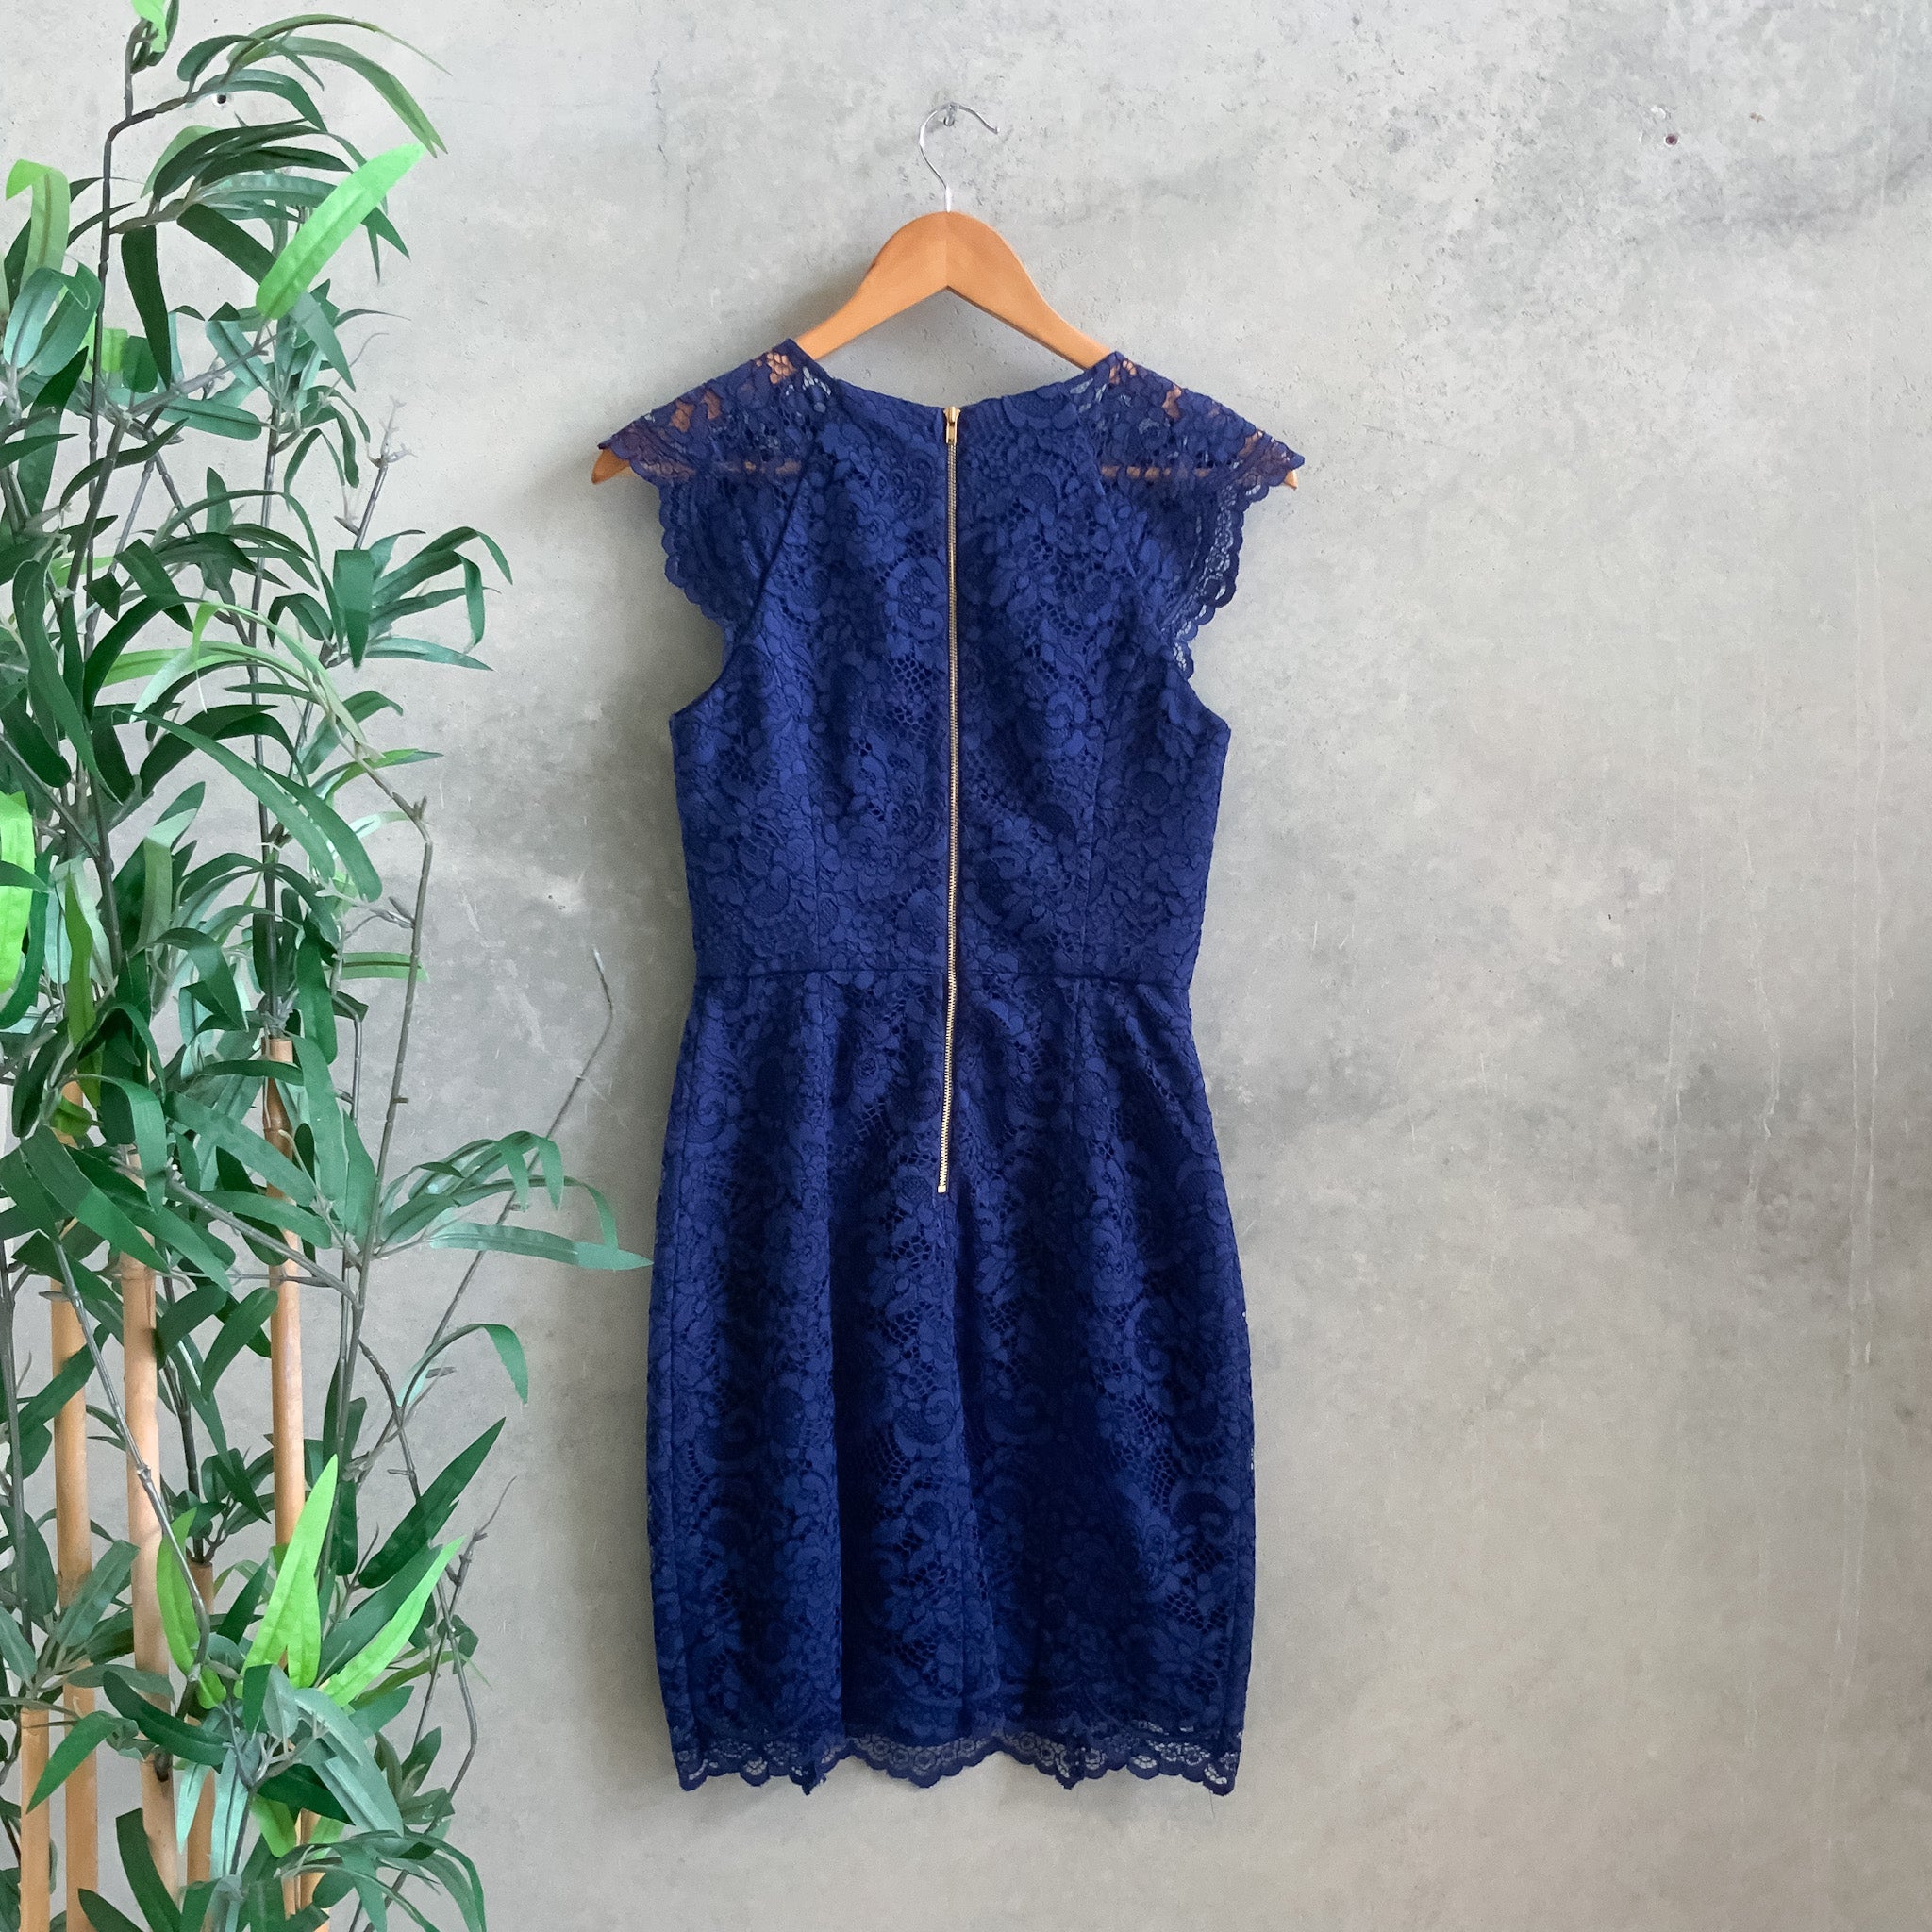 FOREVER NEW Navy Blue Lace Party/Races/Cocktail Dress - Size 6